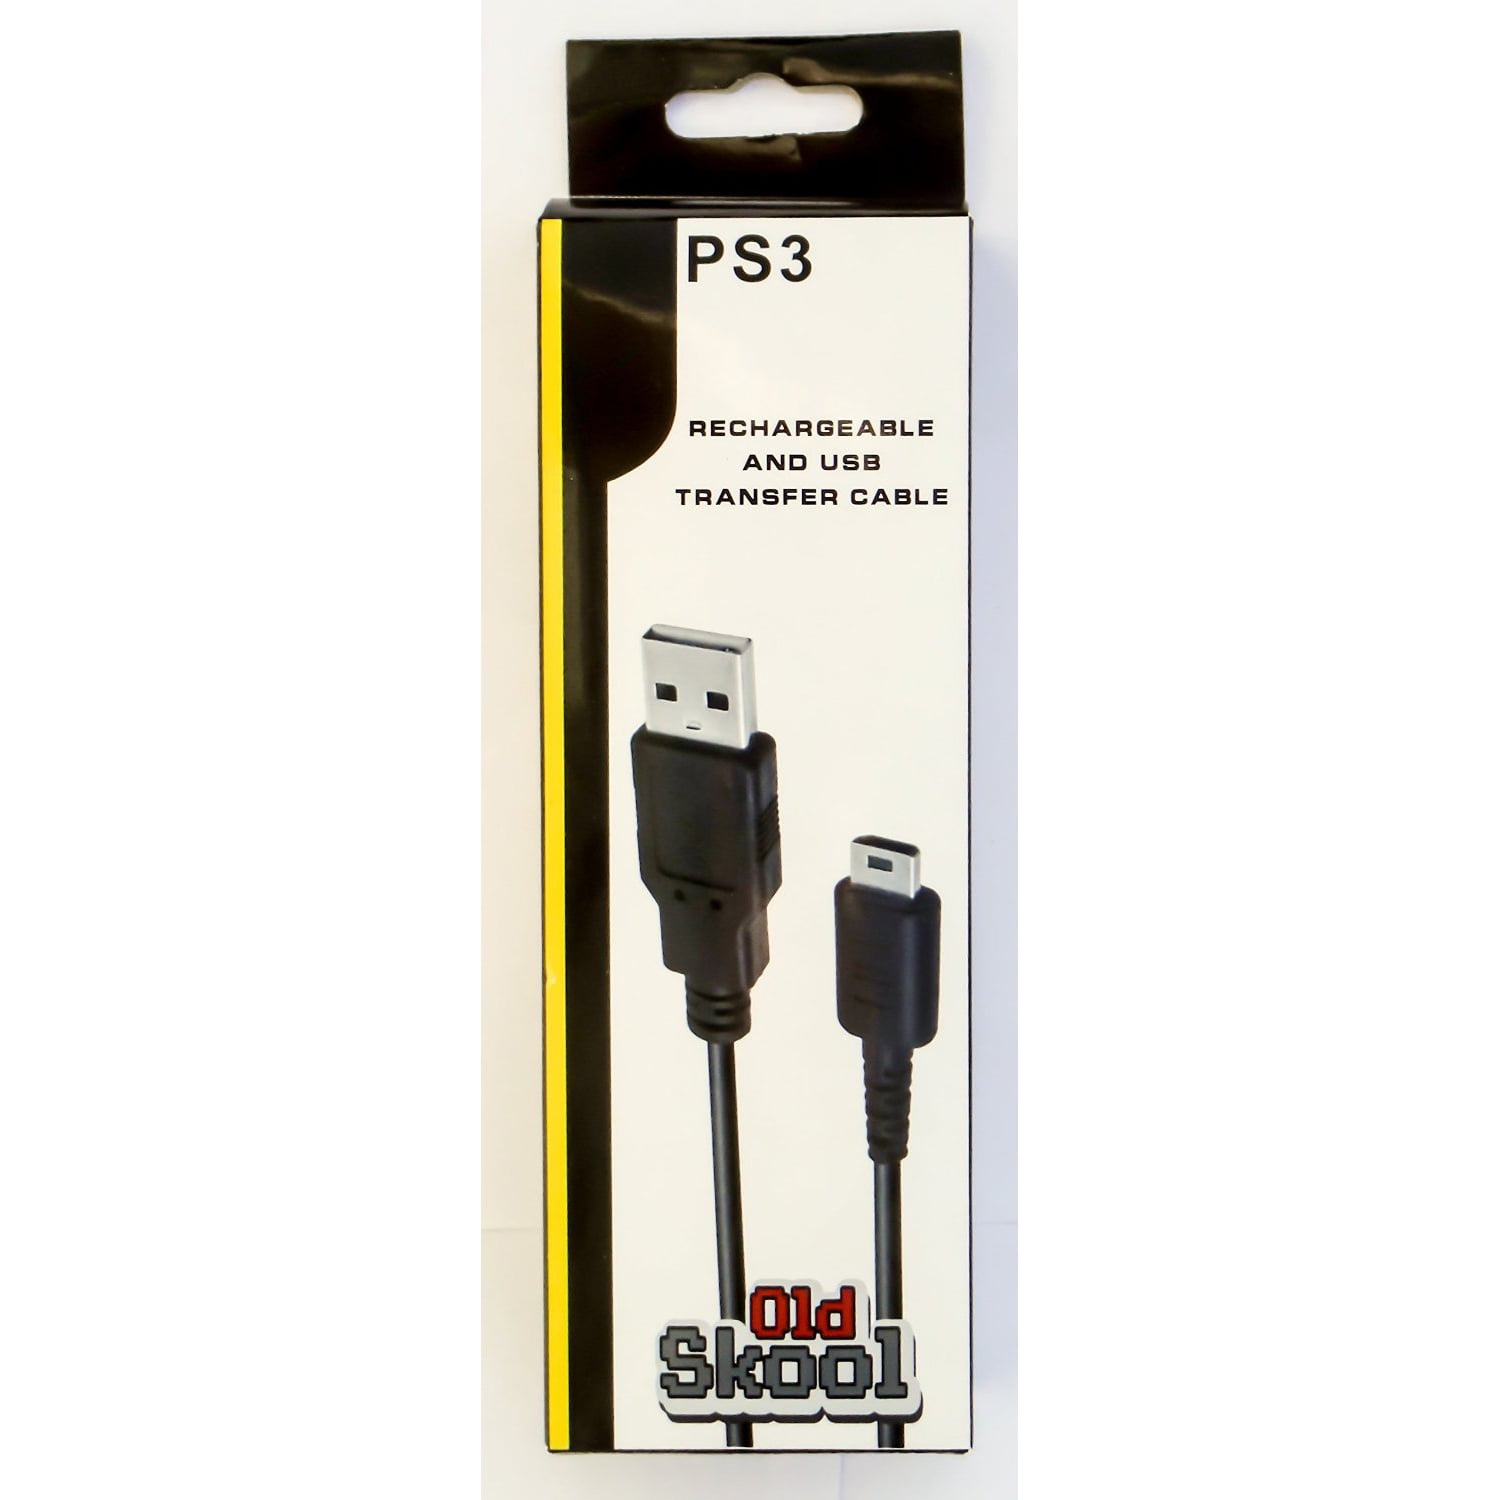 Ps3 Charging Cable Type Sale Online, SAVE 38% - eagleflair.com